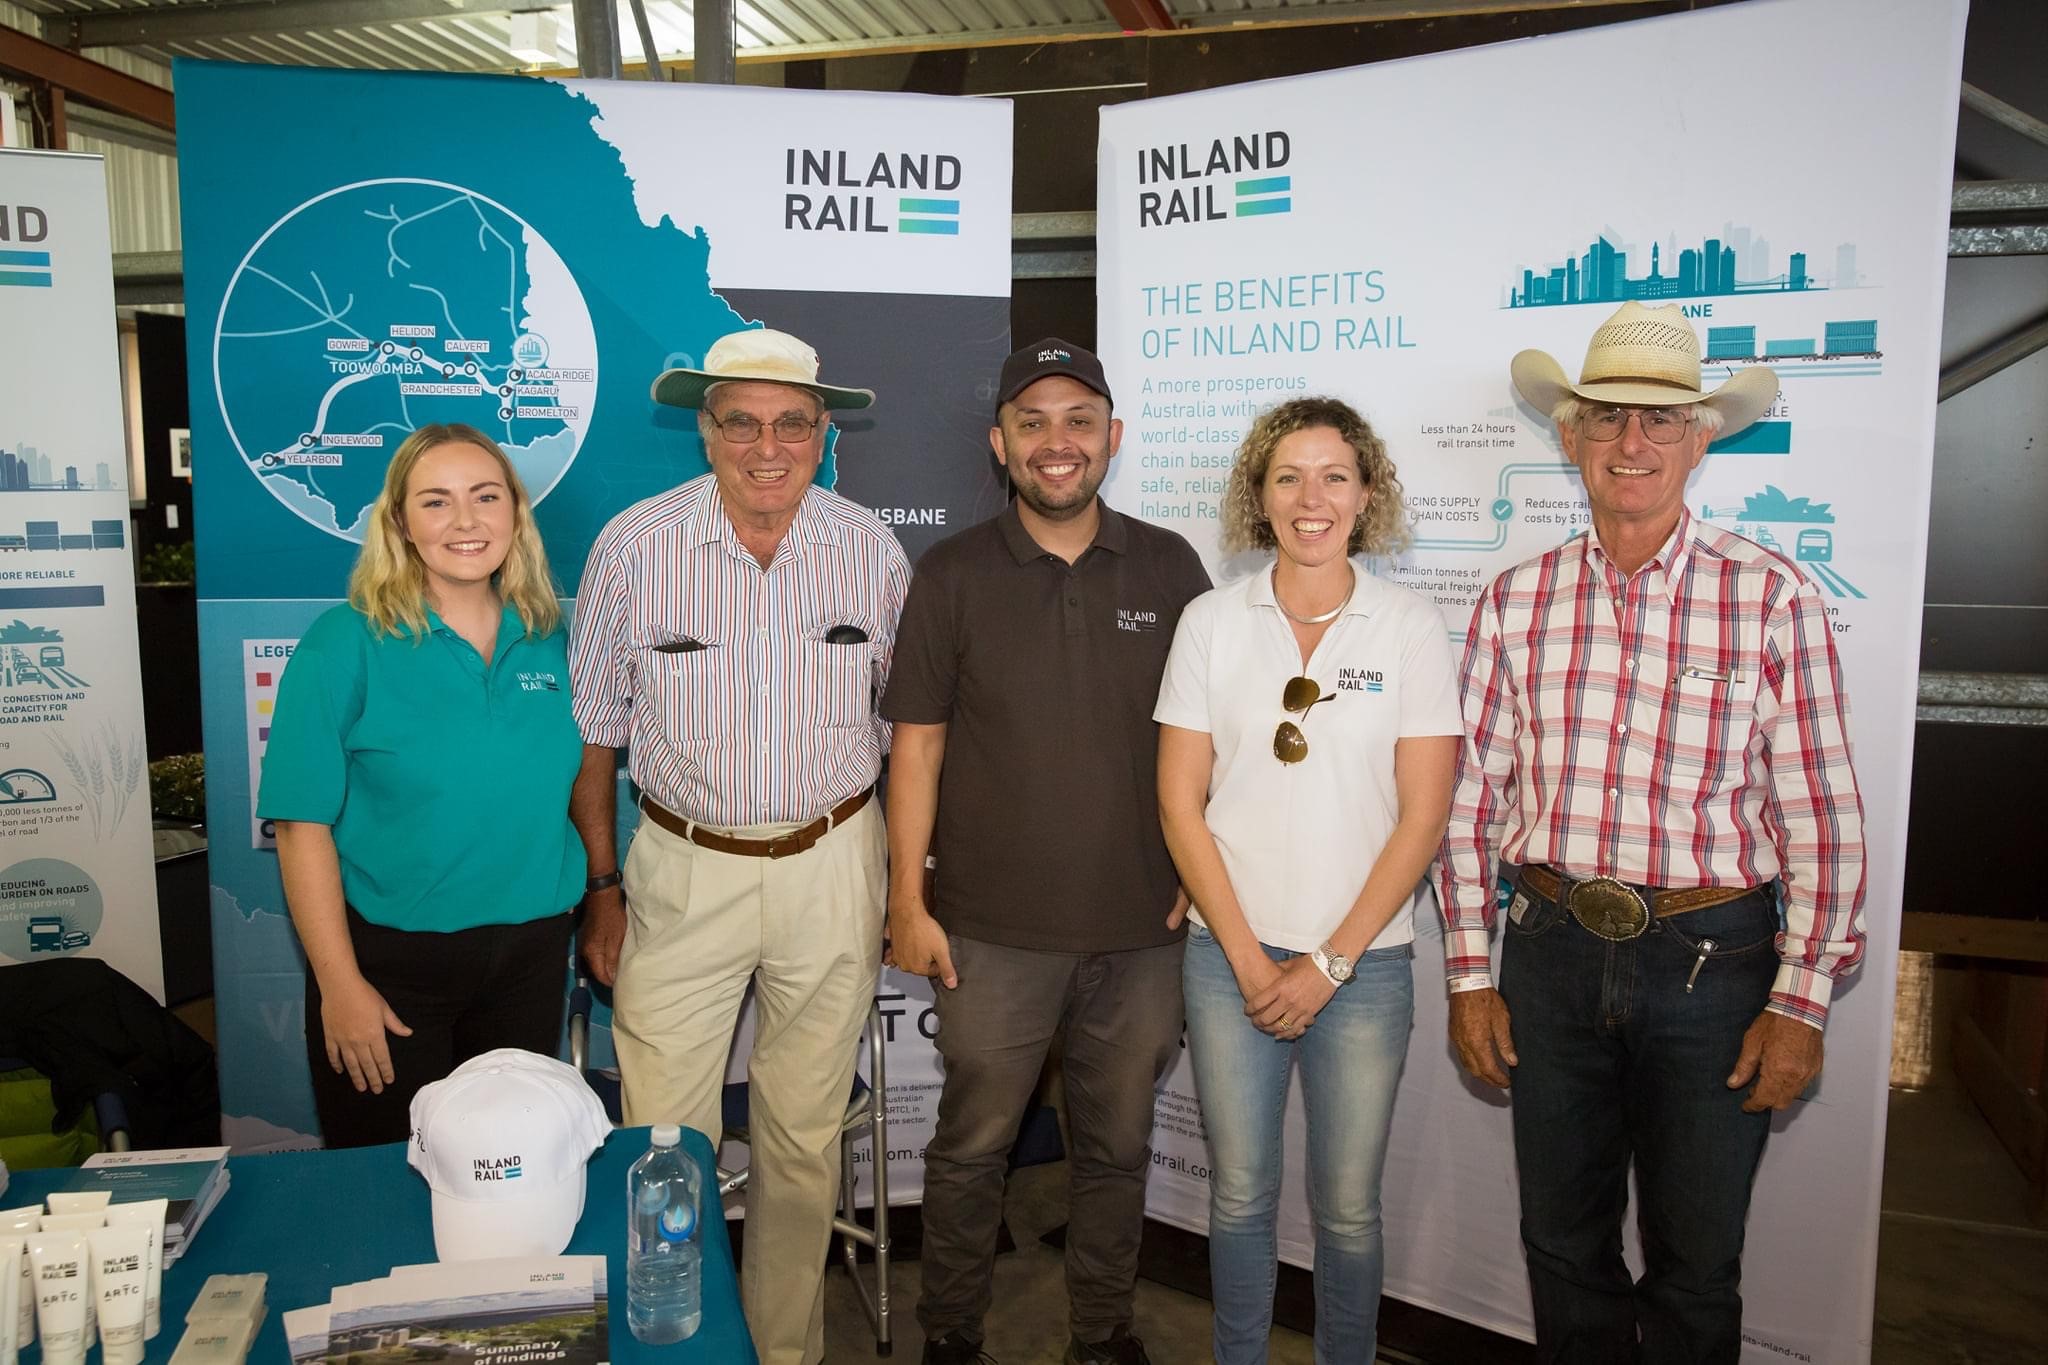 Inland Rail engagement staff standing with local landowners at Goondiwindi Show information stand